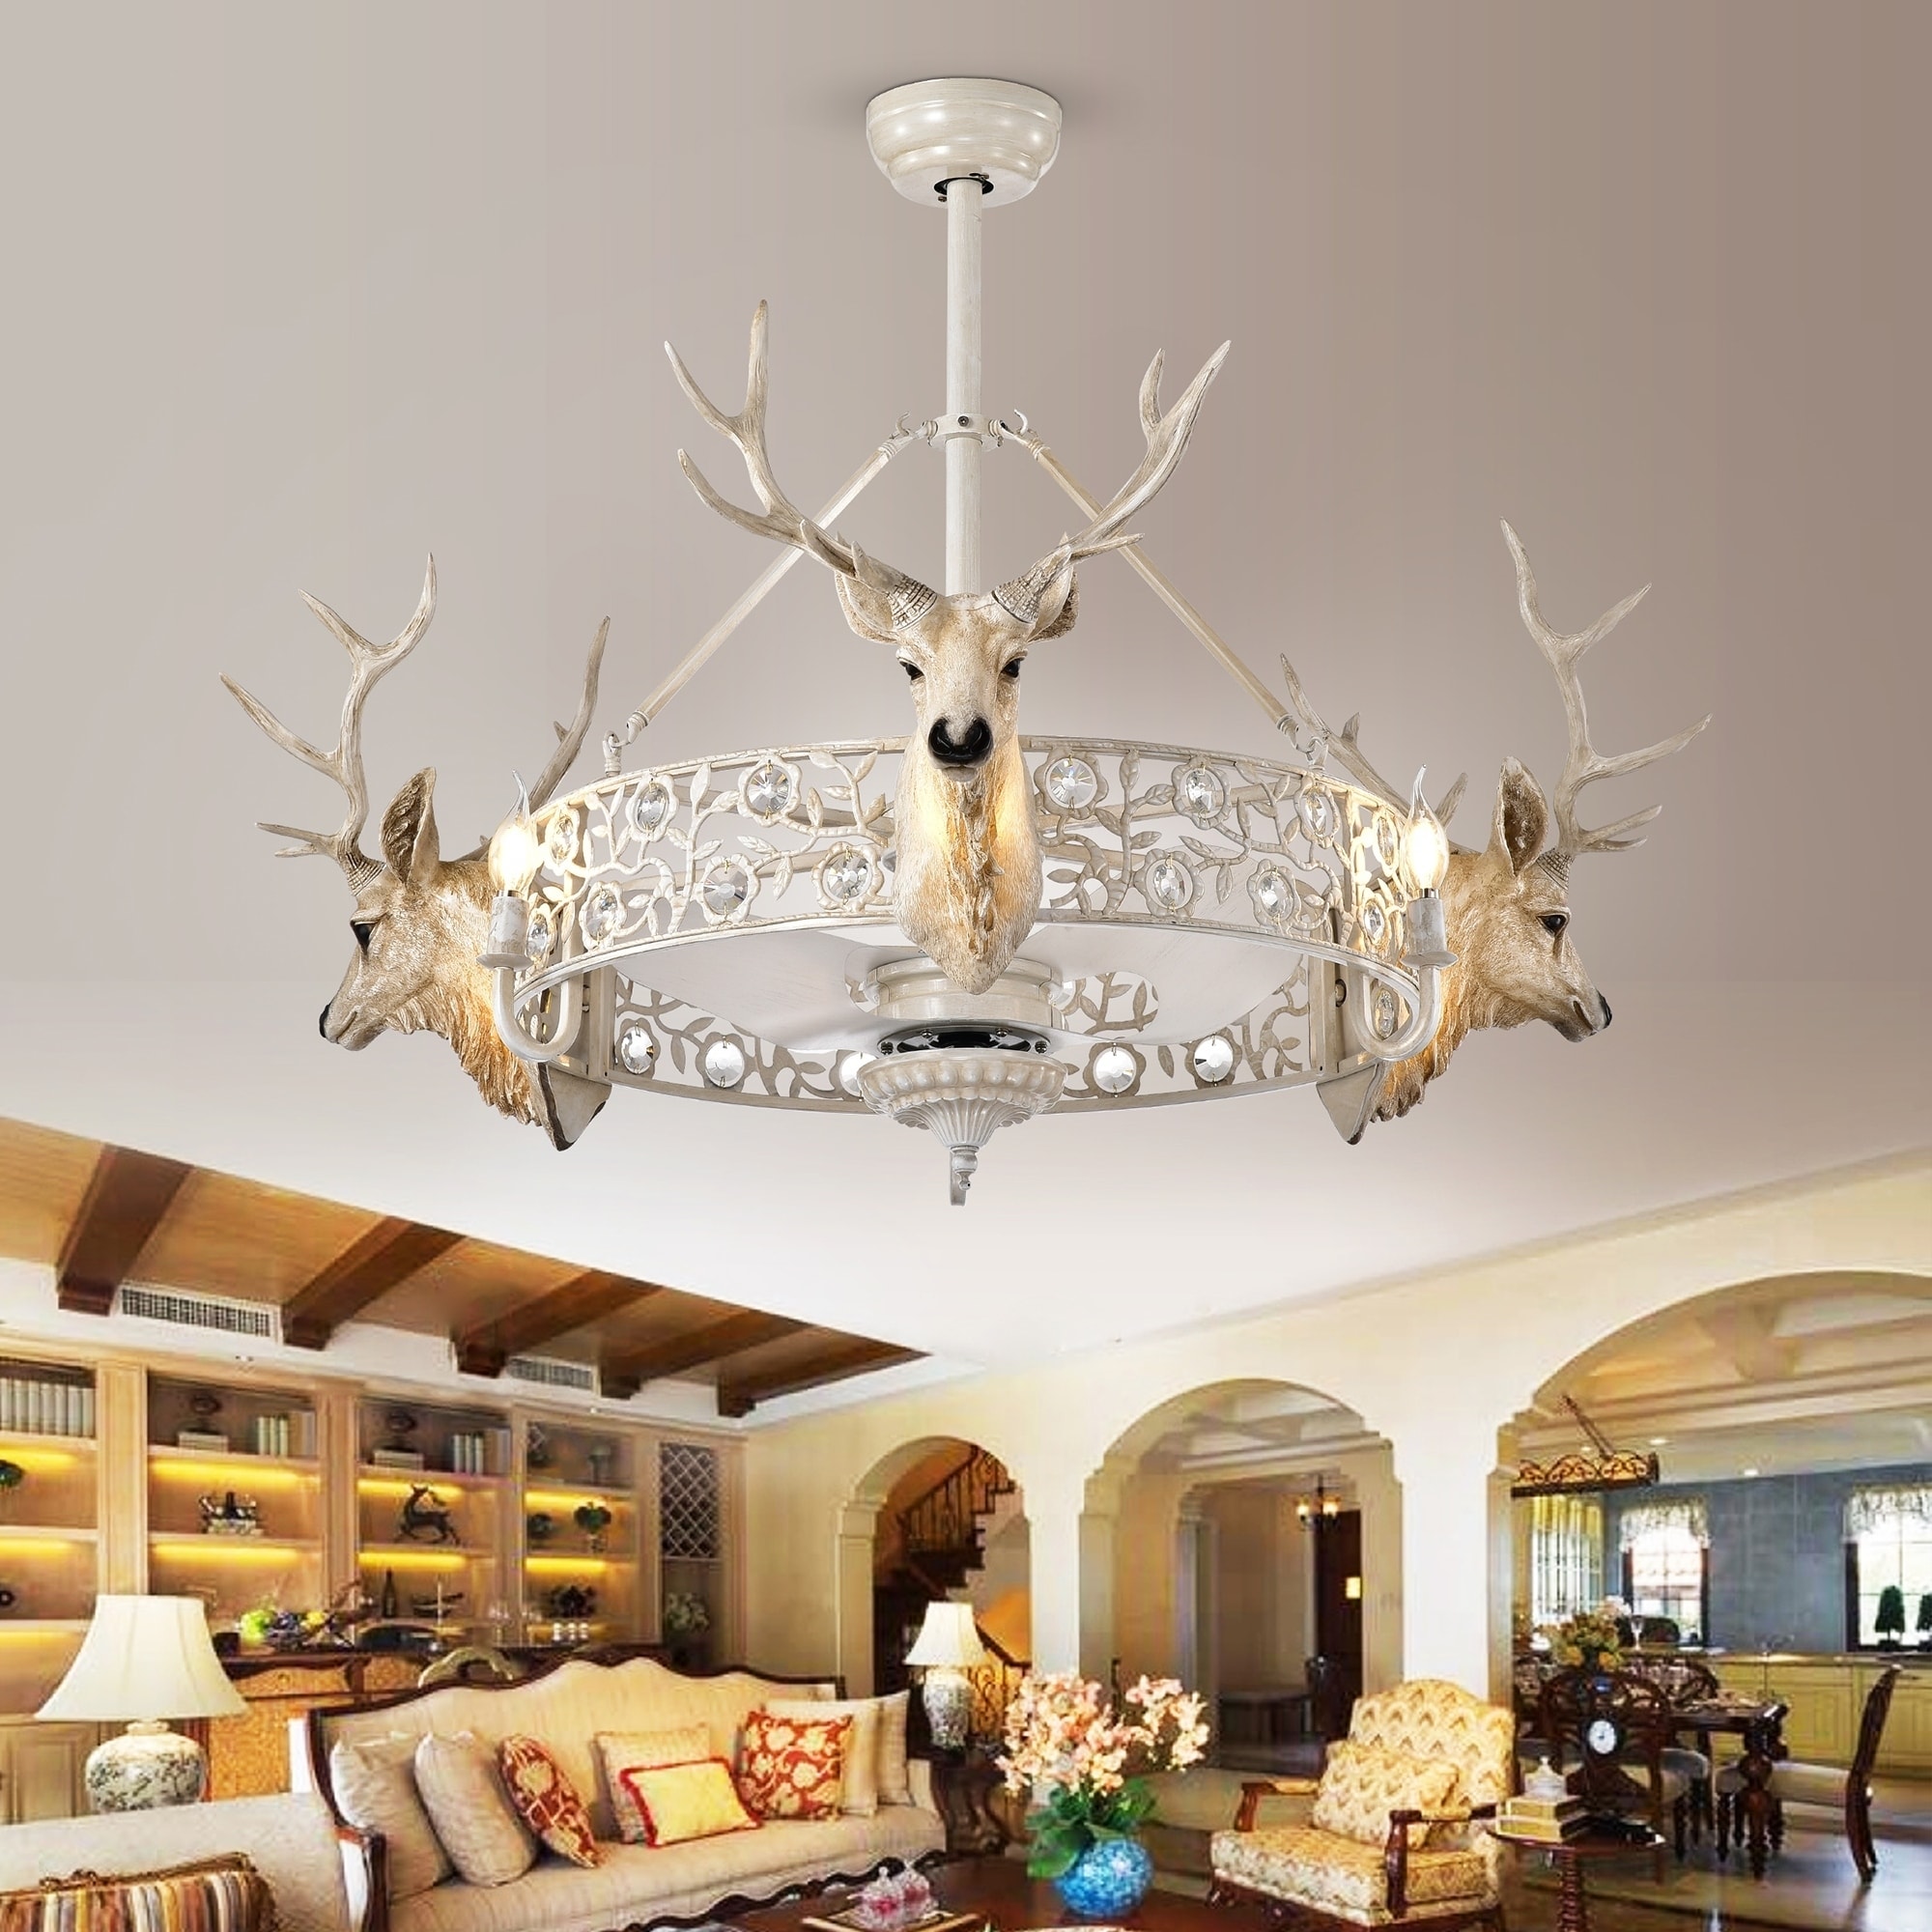 Deer Head Fandelier Led Lighted Ceiling Fan With Remote Control Includes Bulbs